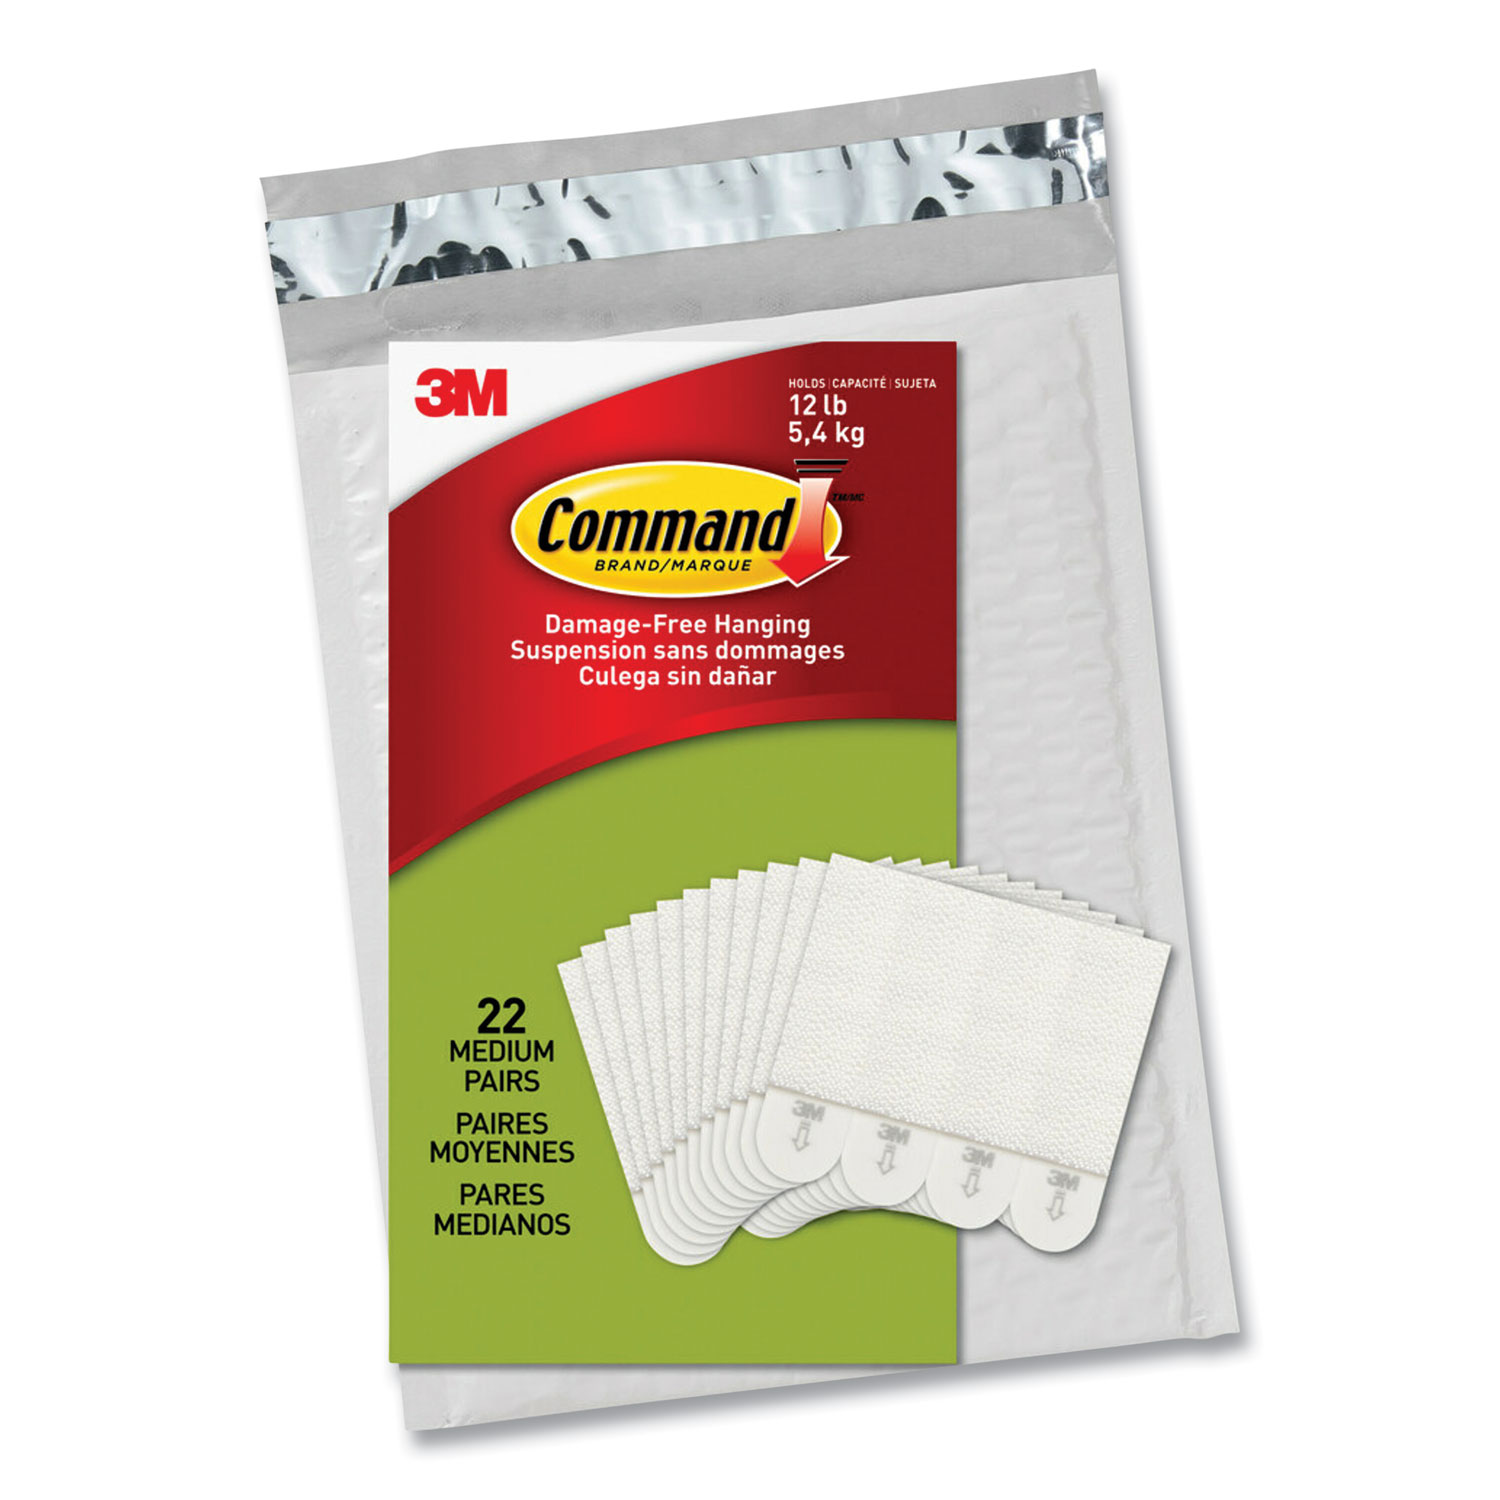 Command Picture Hanging Strips, Value Pack, Removable, (8) Large 0.63 X  3.63 Pairs, (4) Medium 0.5 X 2.75 Pairs, White